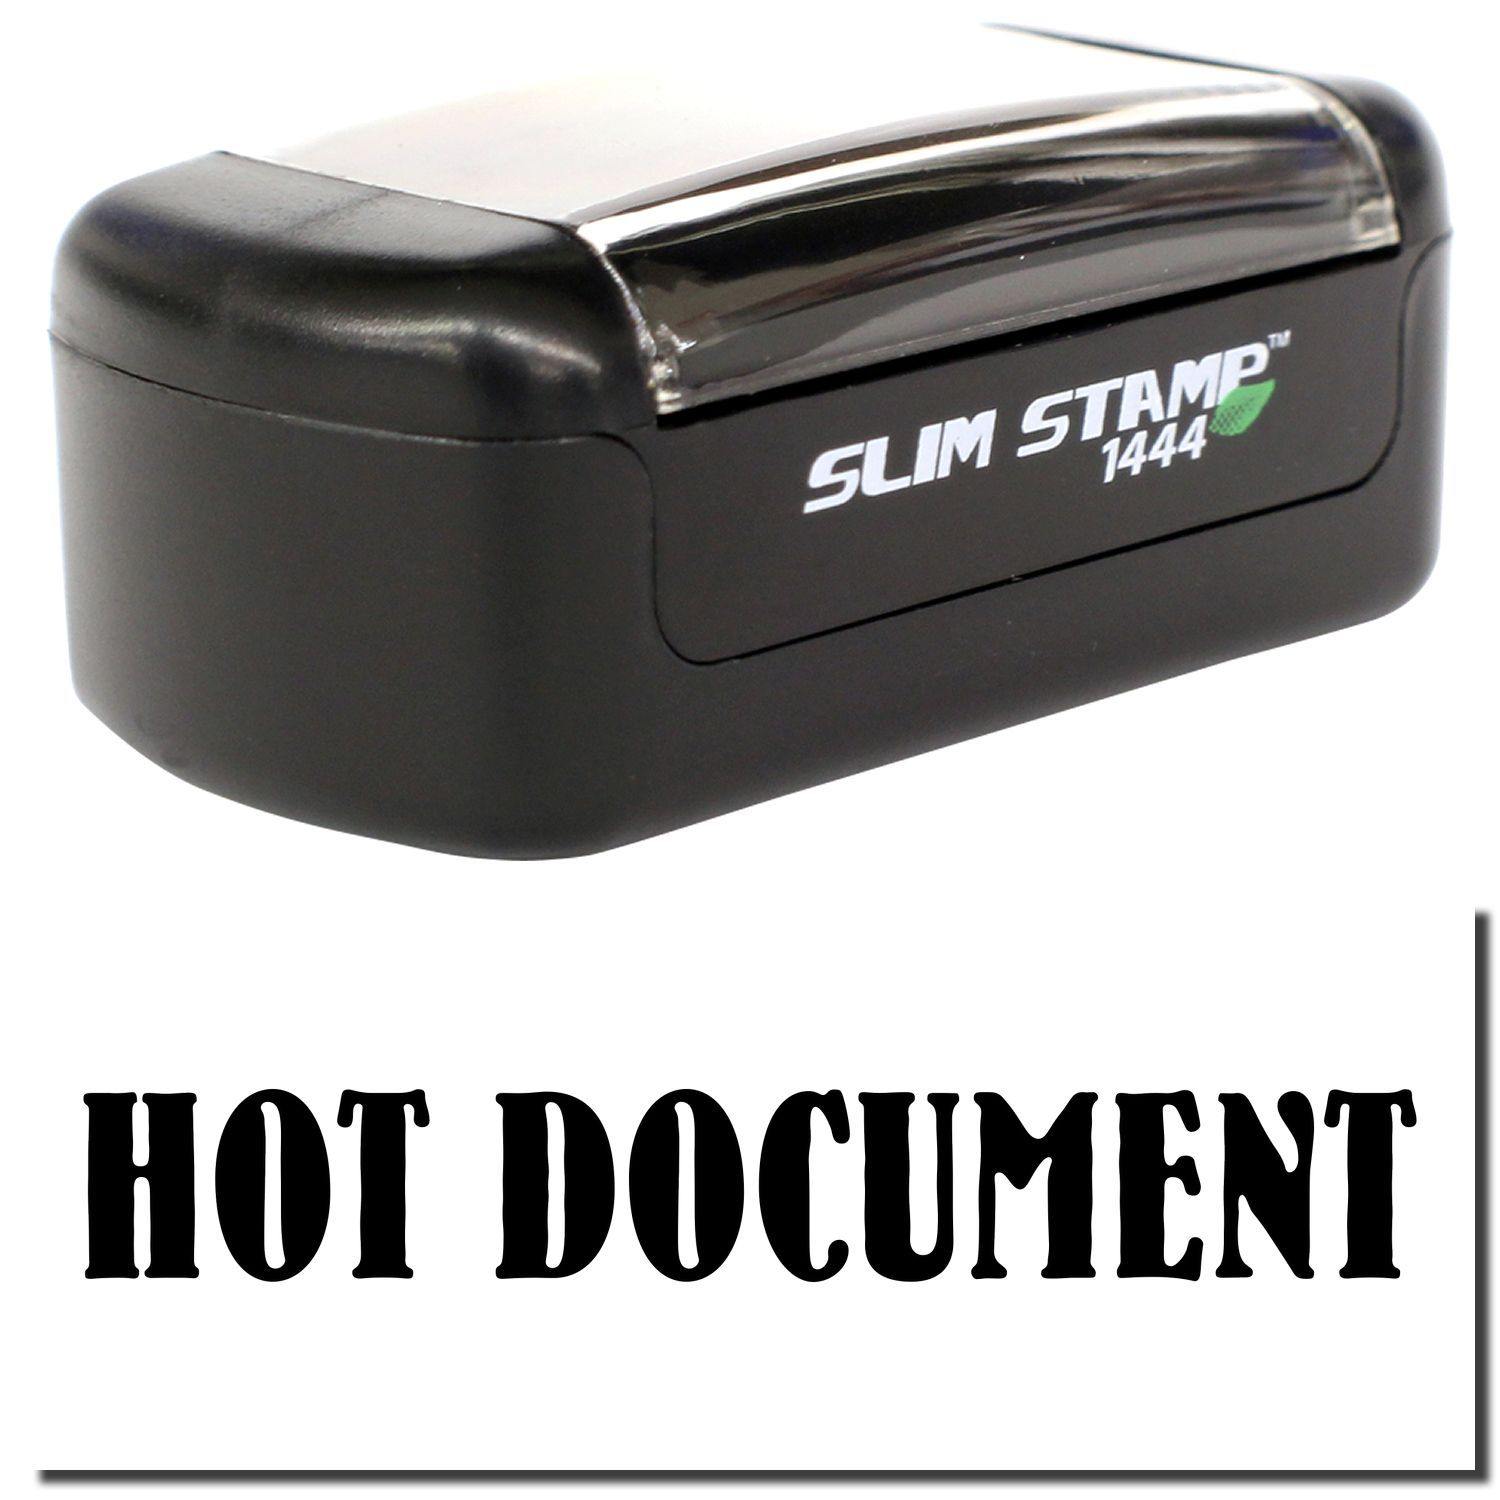 A stock office pre-inked stamp with a stamped image showing how the text "HOT DOCUMENT" is displayed after stamping.